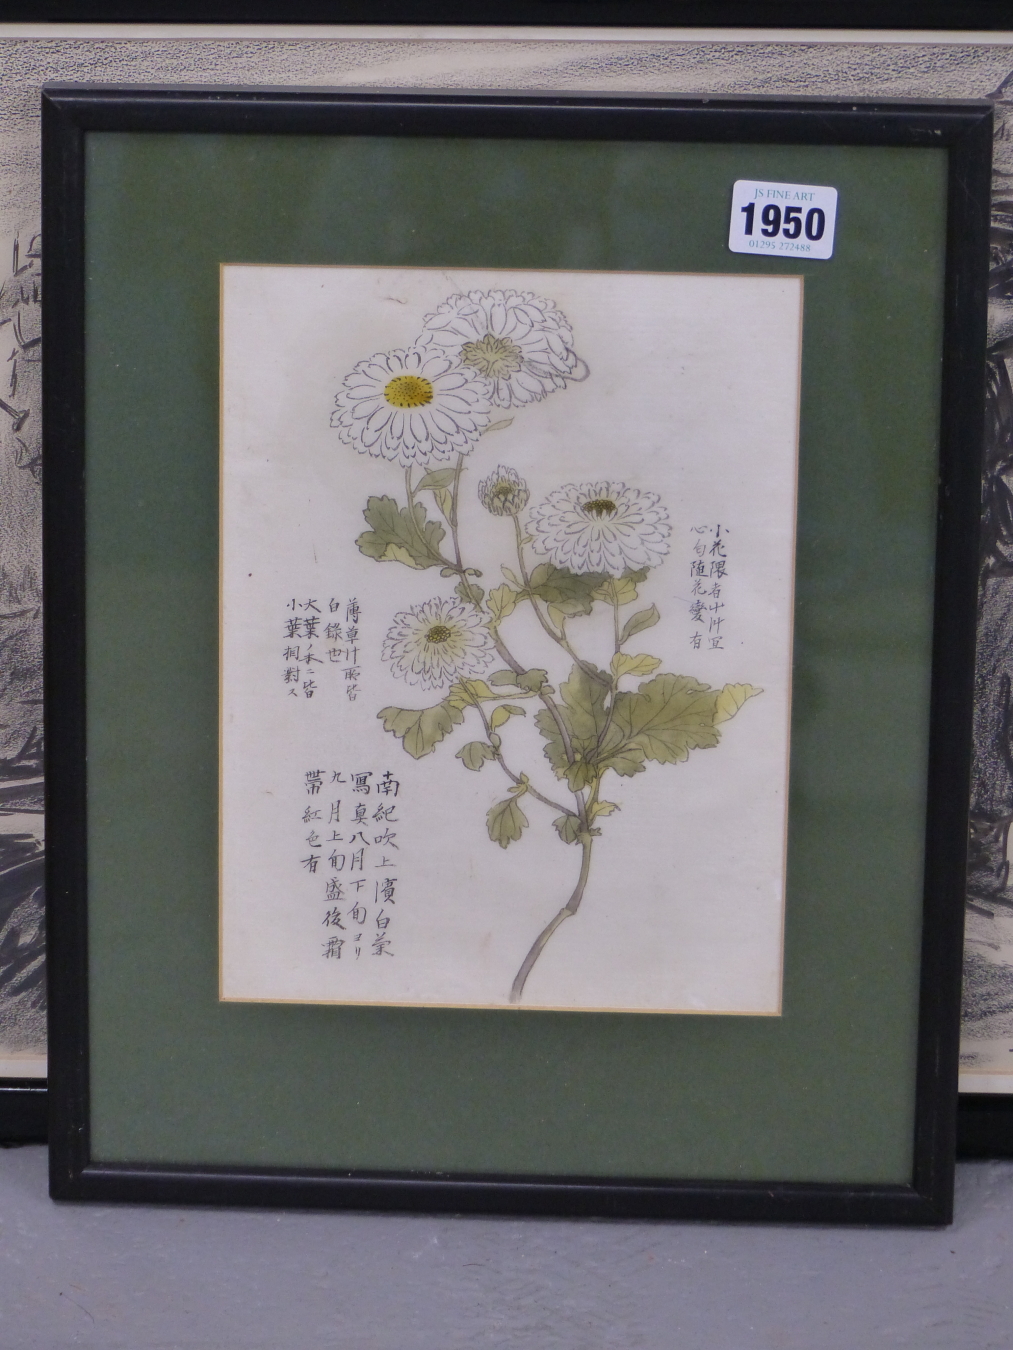 ORIENTAL SCHOOL, 19THC. CHRYSANTHEMUMS AND KANJI TEXT. INK AND WASH ON THIN RICE PAPER, 23 X 17 CM. - Bild 3 aus 5